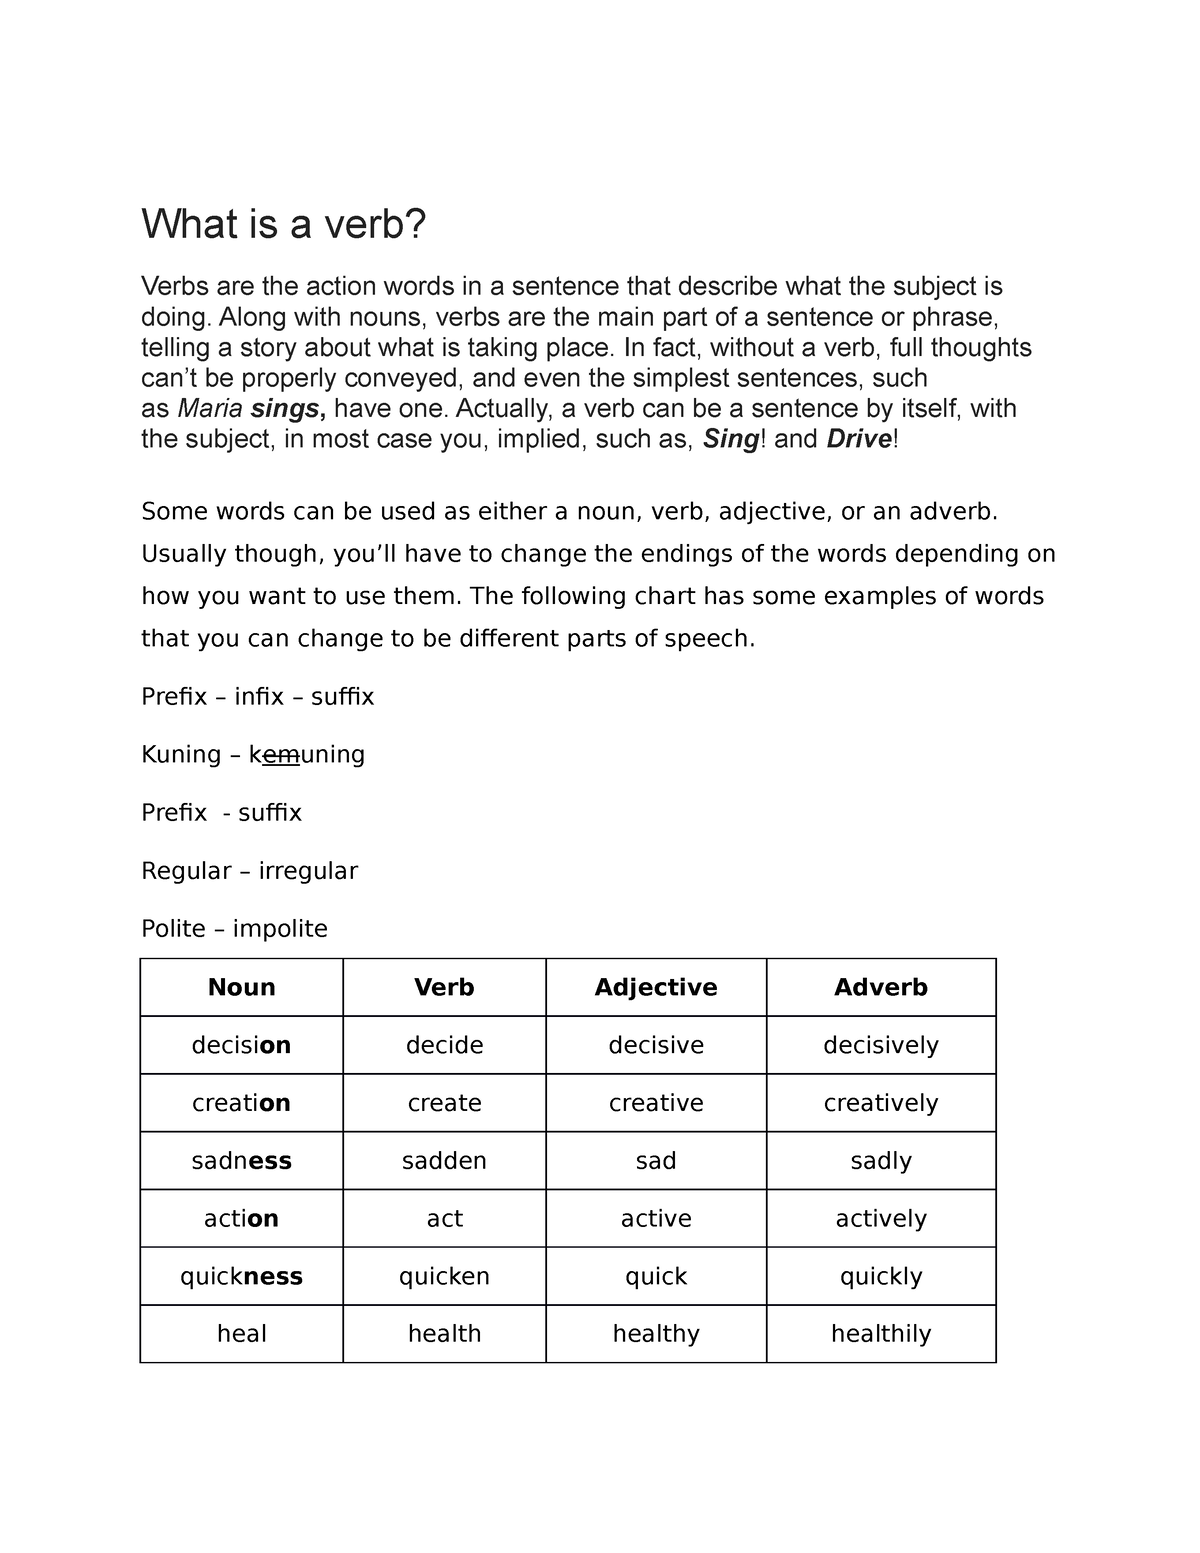 materials-5-parts-of-speech-what-is-a-verb-verbs-are-the-action